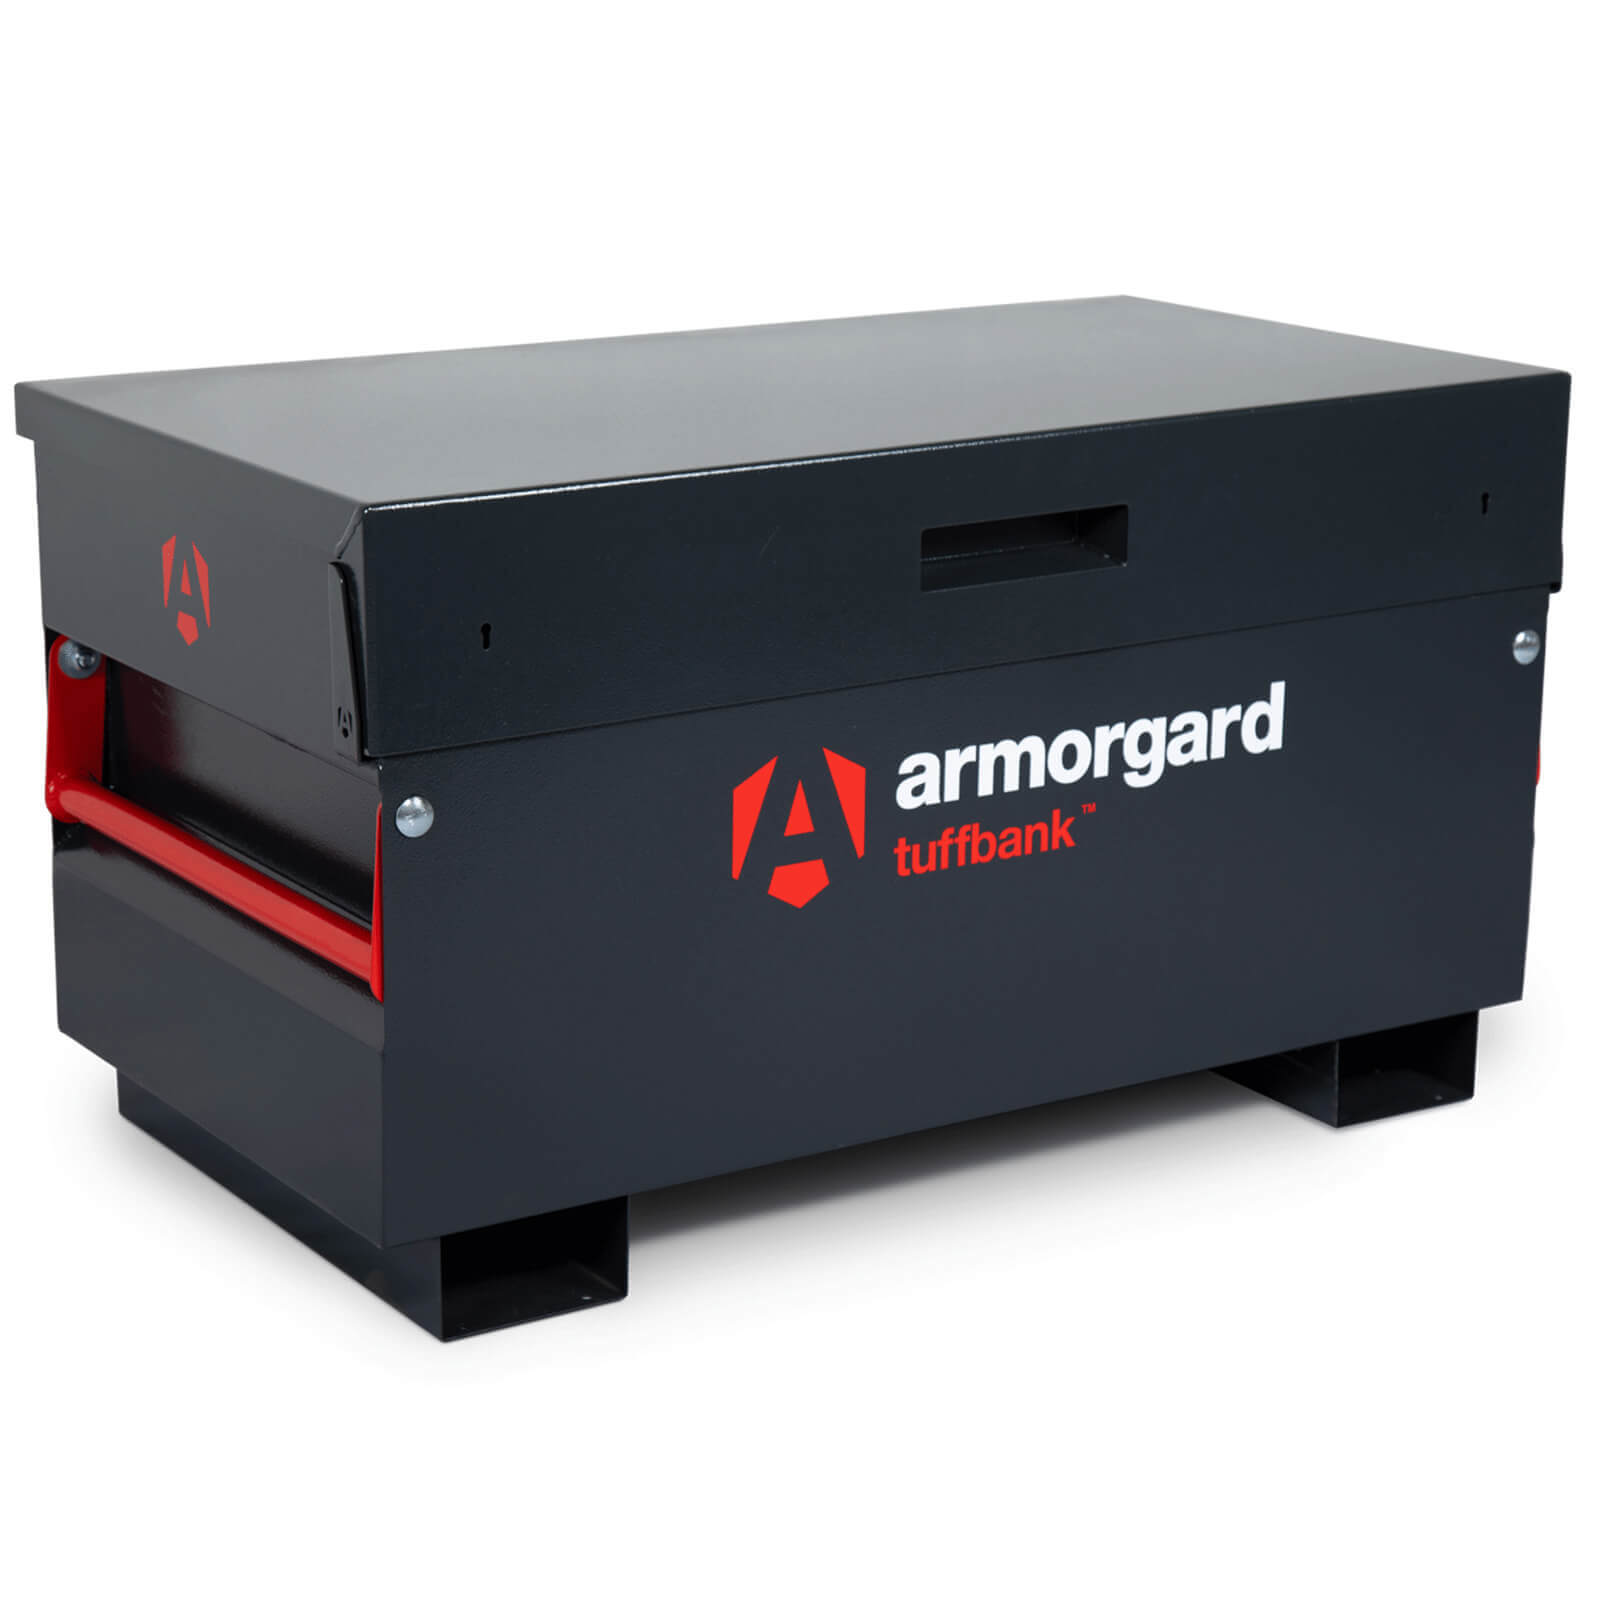 Image of Armorgard Tuffbank Secure Site Storage Chest 1275mm 665mm 660mm